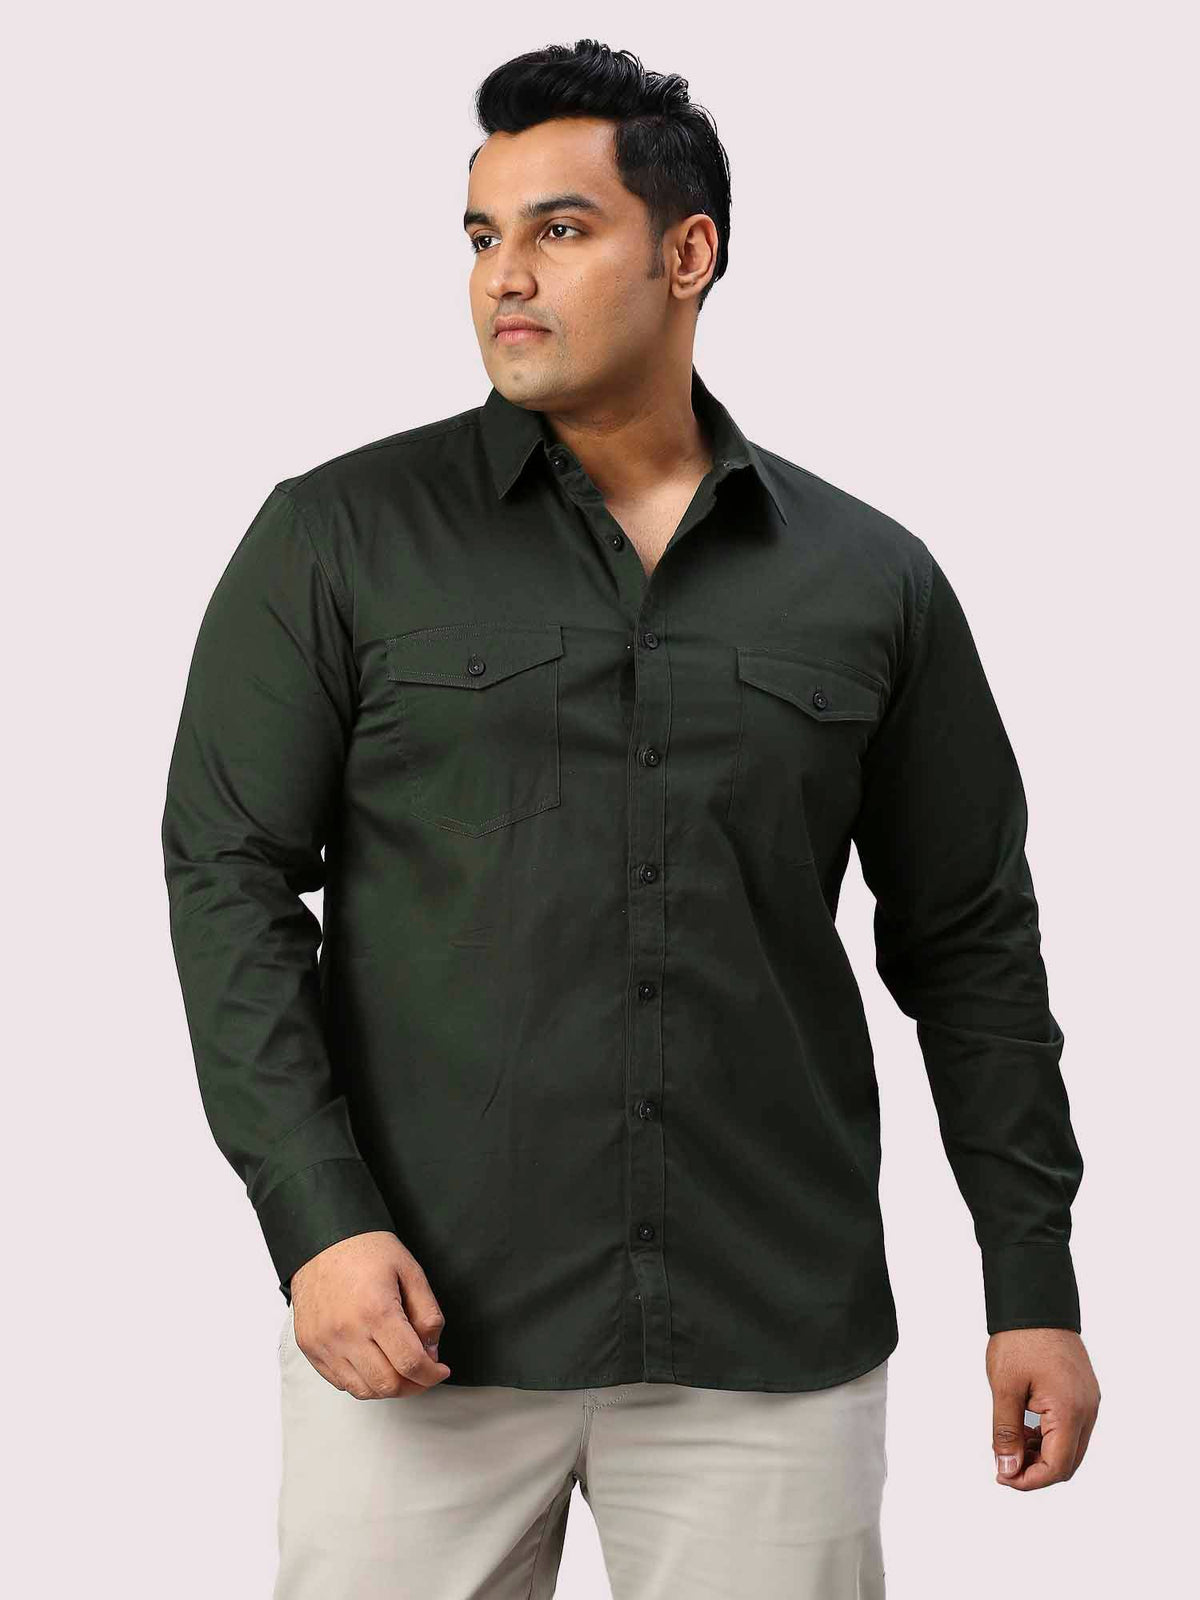 Olive Green Solid Pure Cotton Double Pocket Full Sleeve Shirt Men's Plus Size - Guniaa Fashions